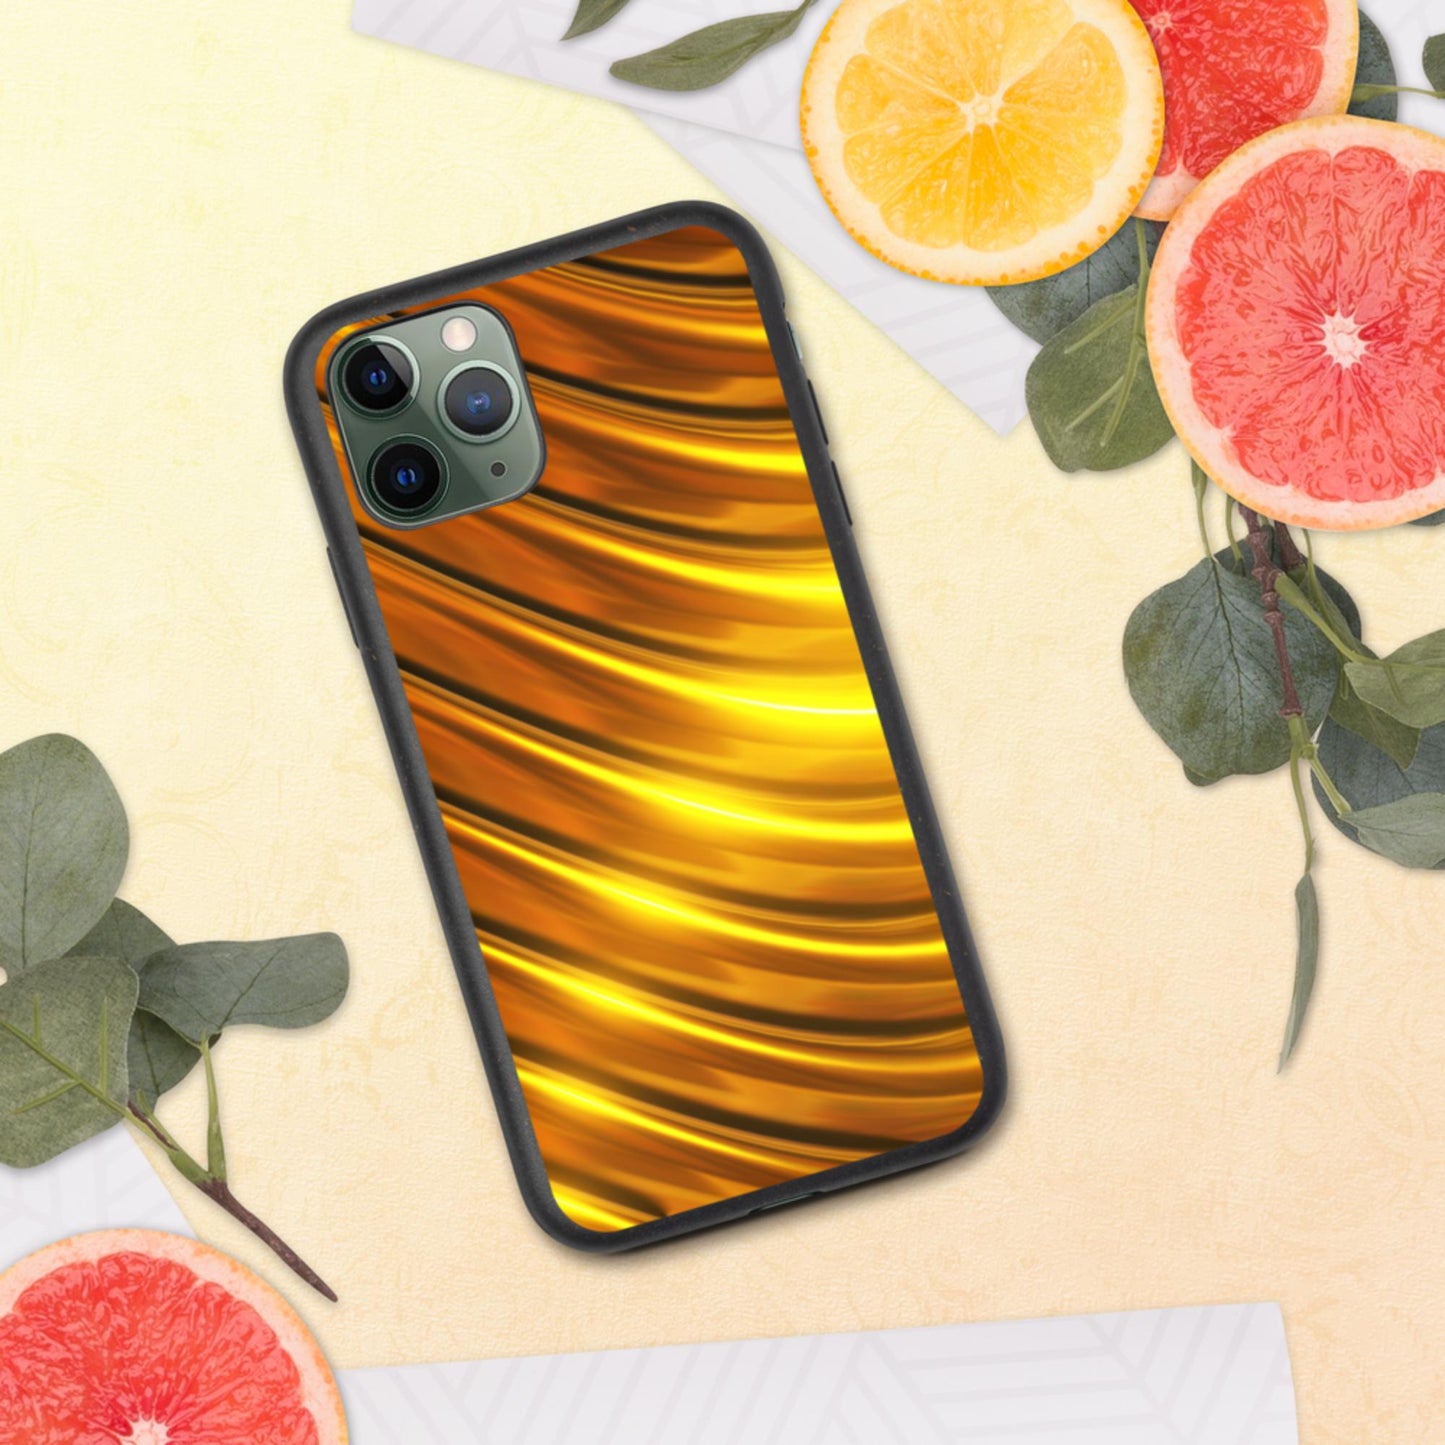 Biodegradable iPhone Case With Classy Design